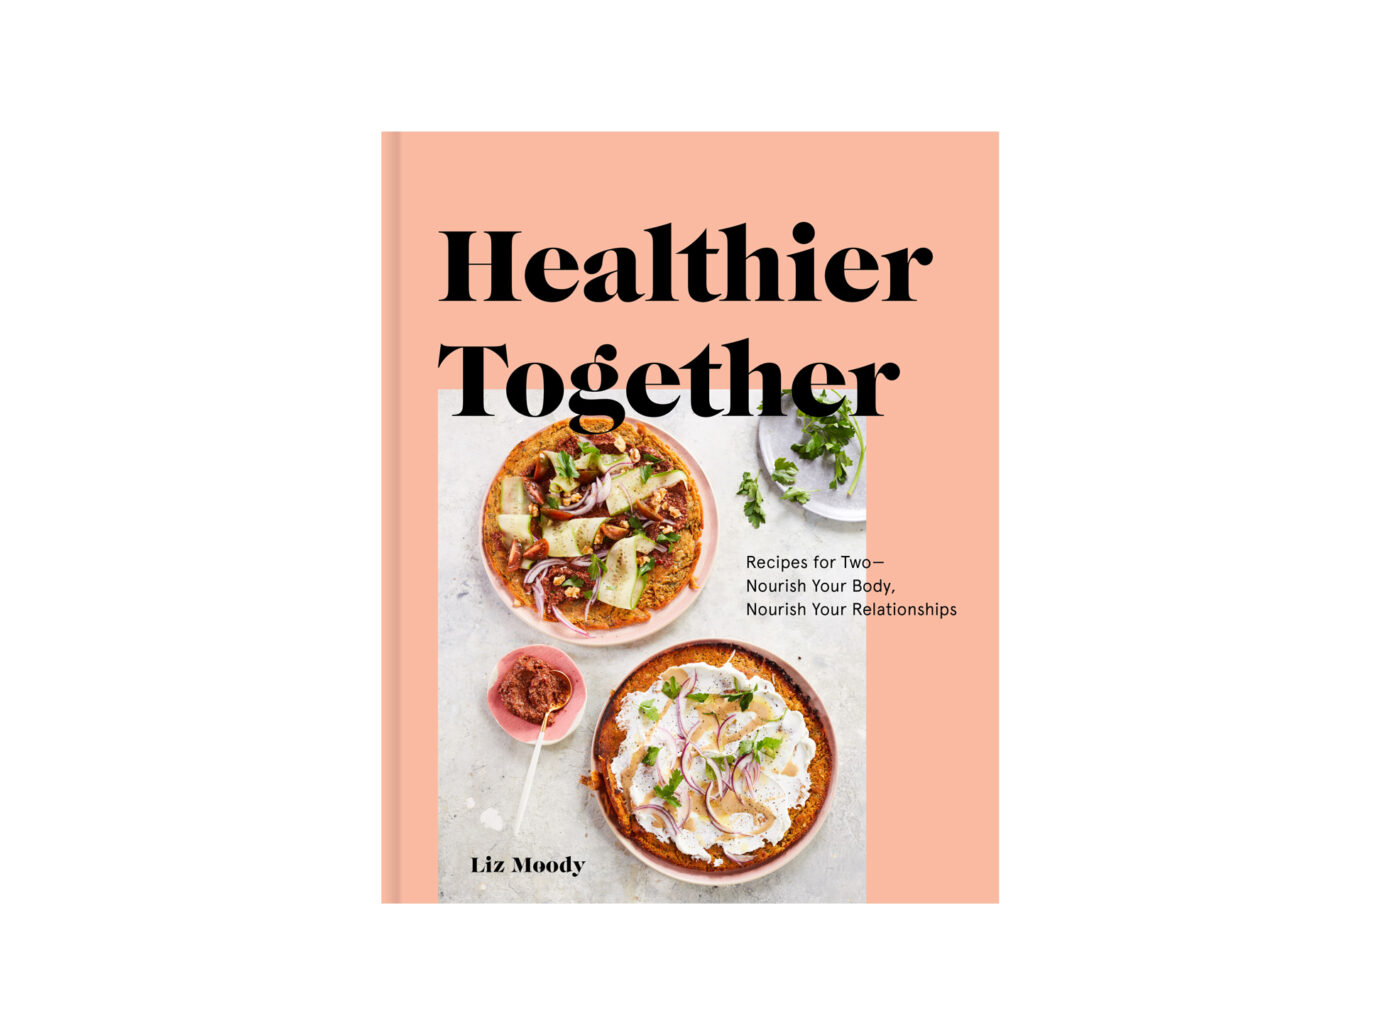 Healthier Together: Recipes for Two—Nourish Your Body, Nourish Your Relationships' Cookbook